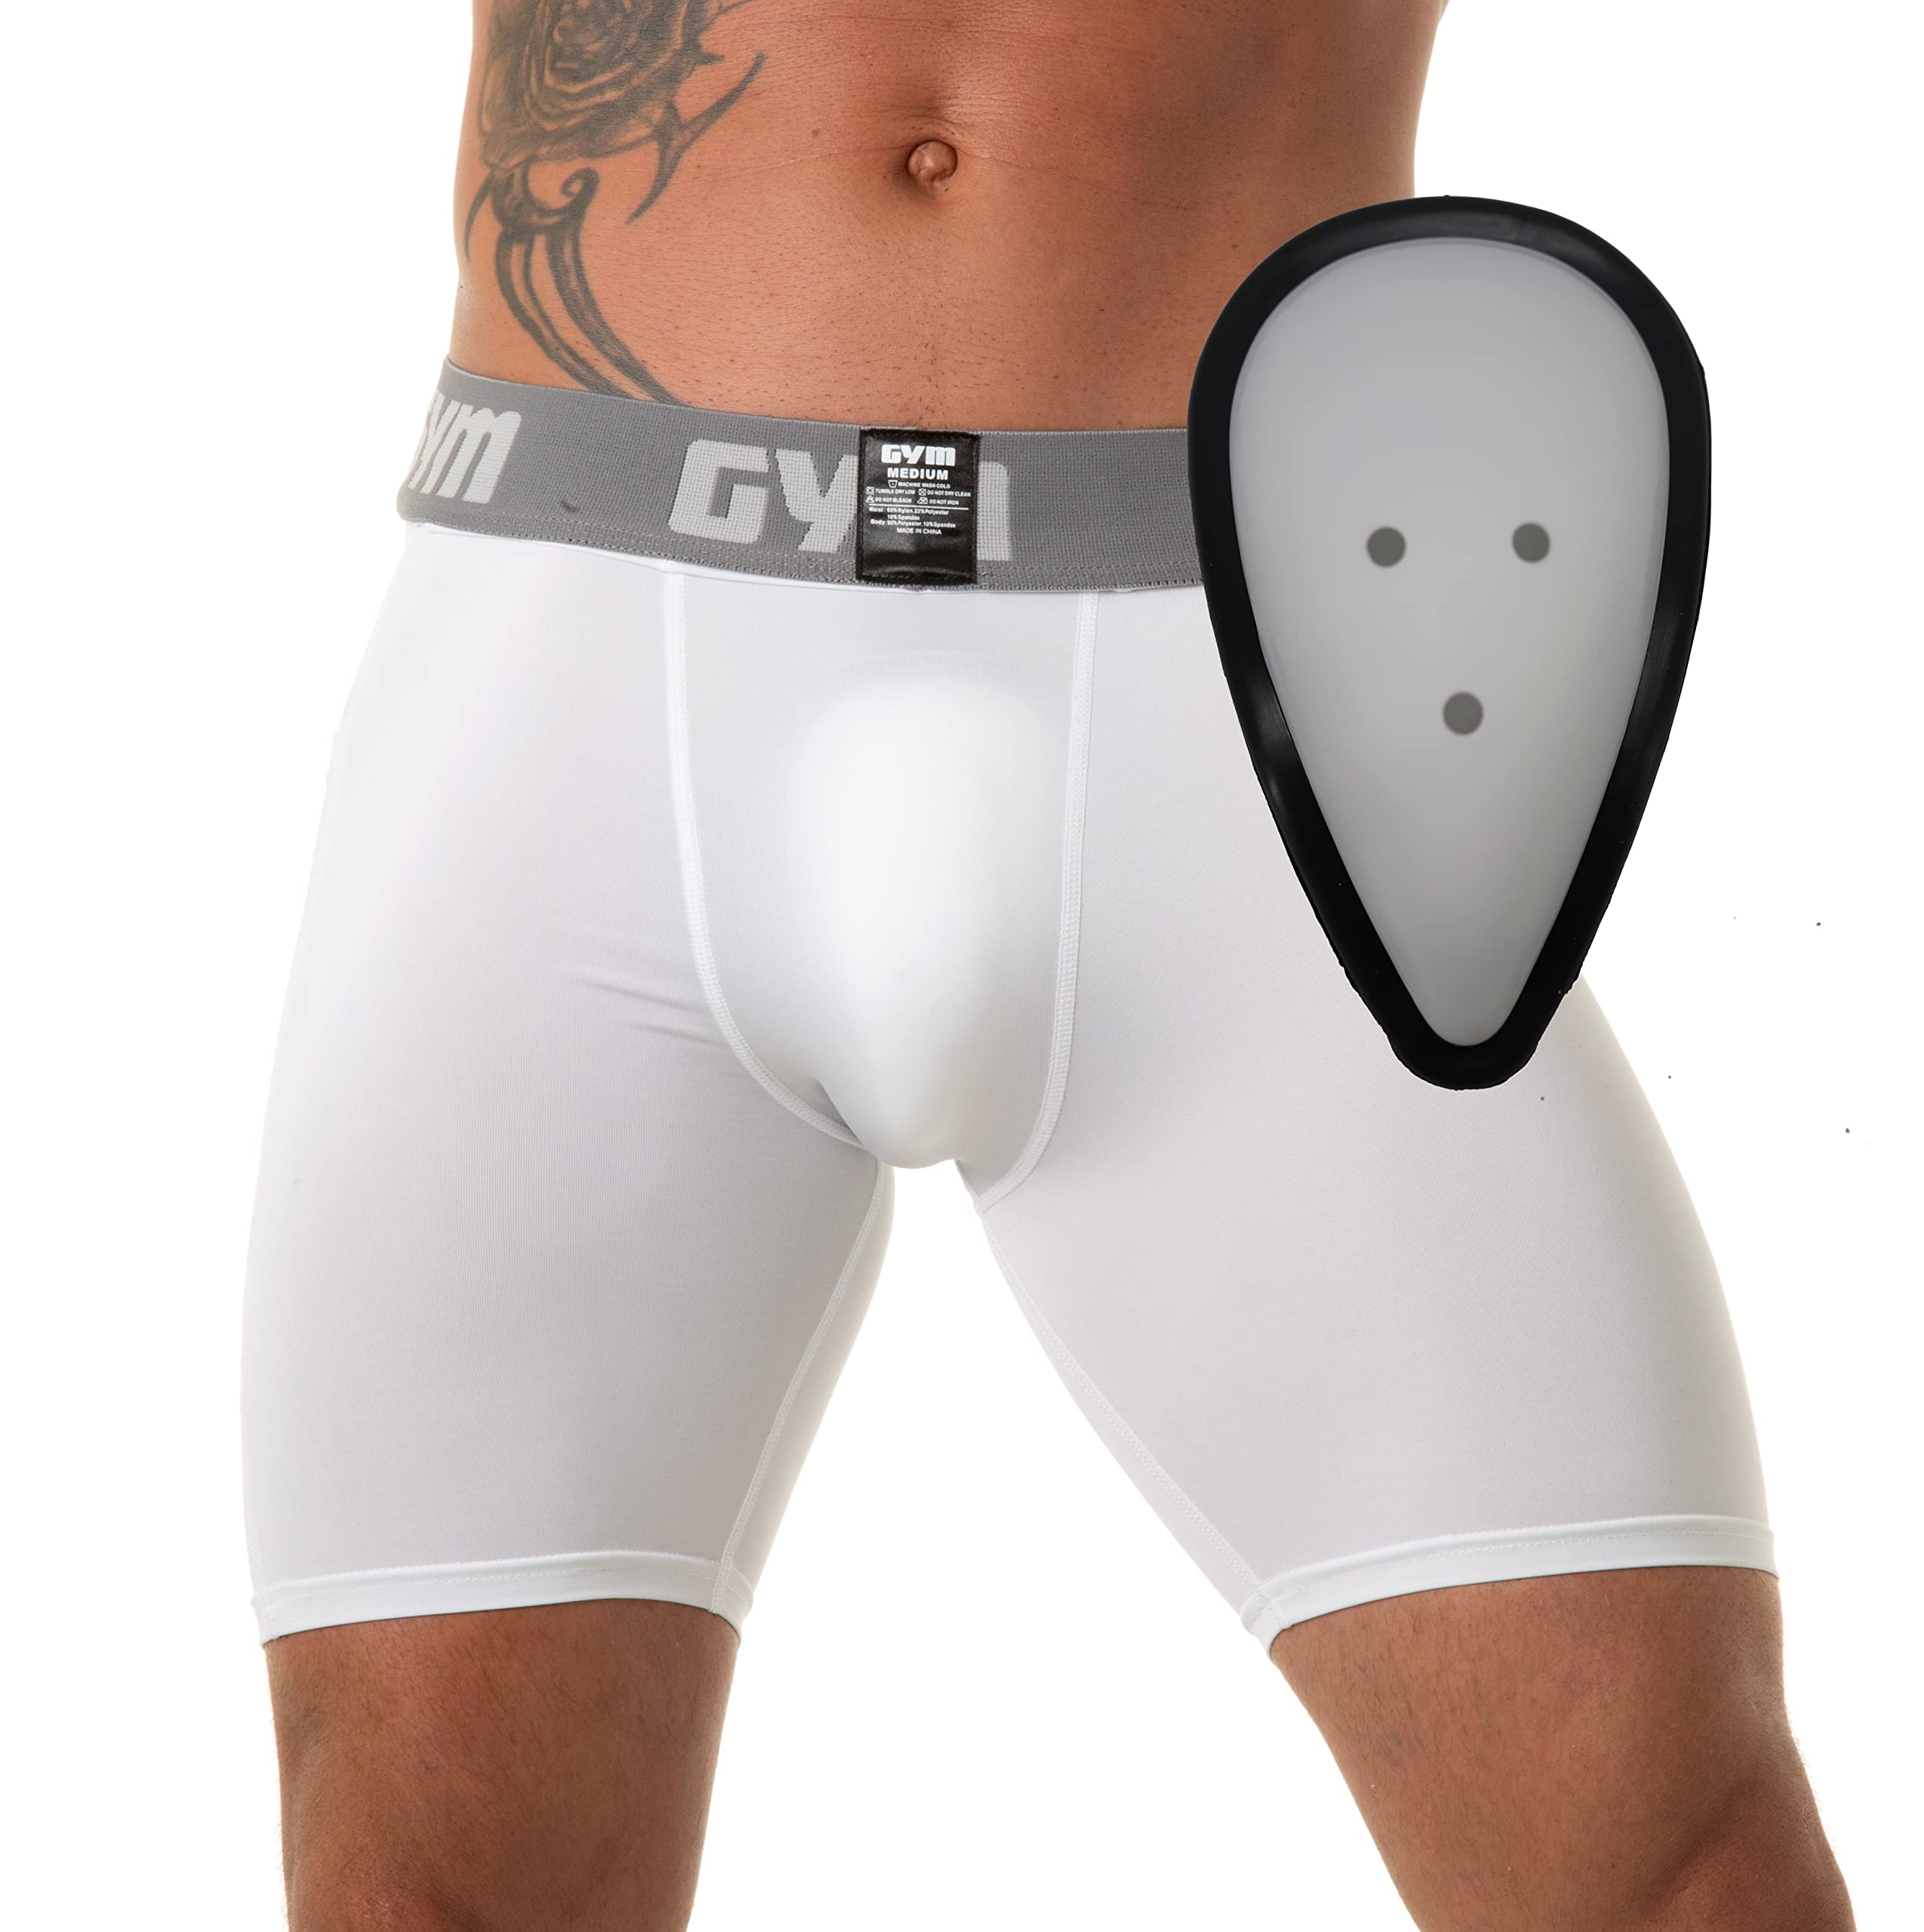 Gym Men's Sports Compression Shorts with Cup Pocket and Hard Cup